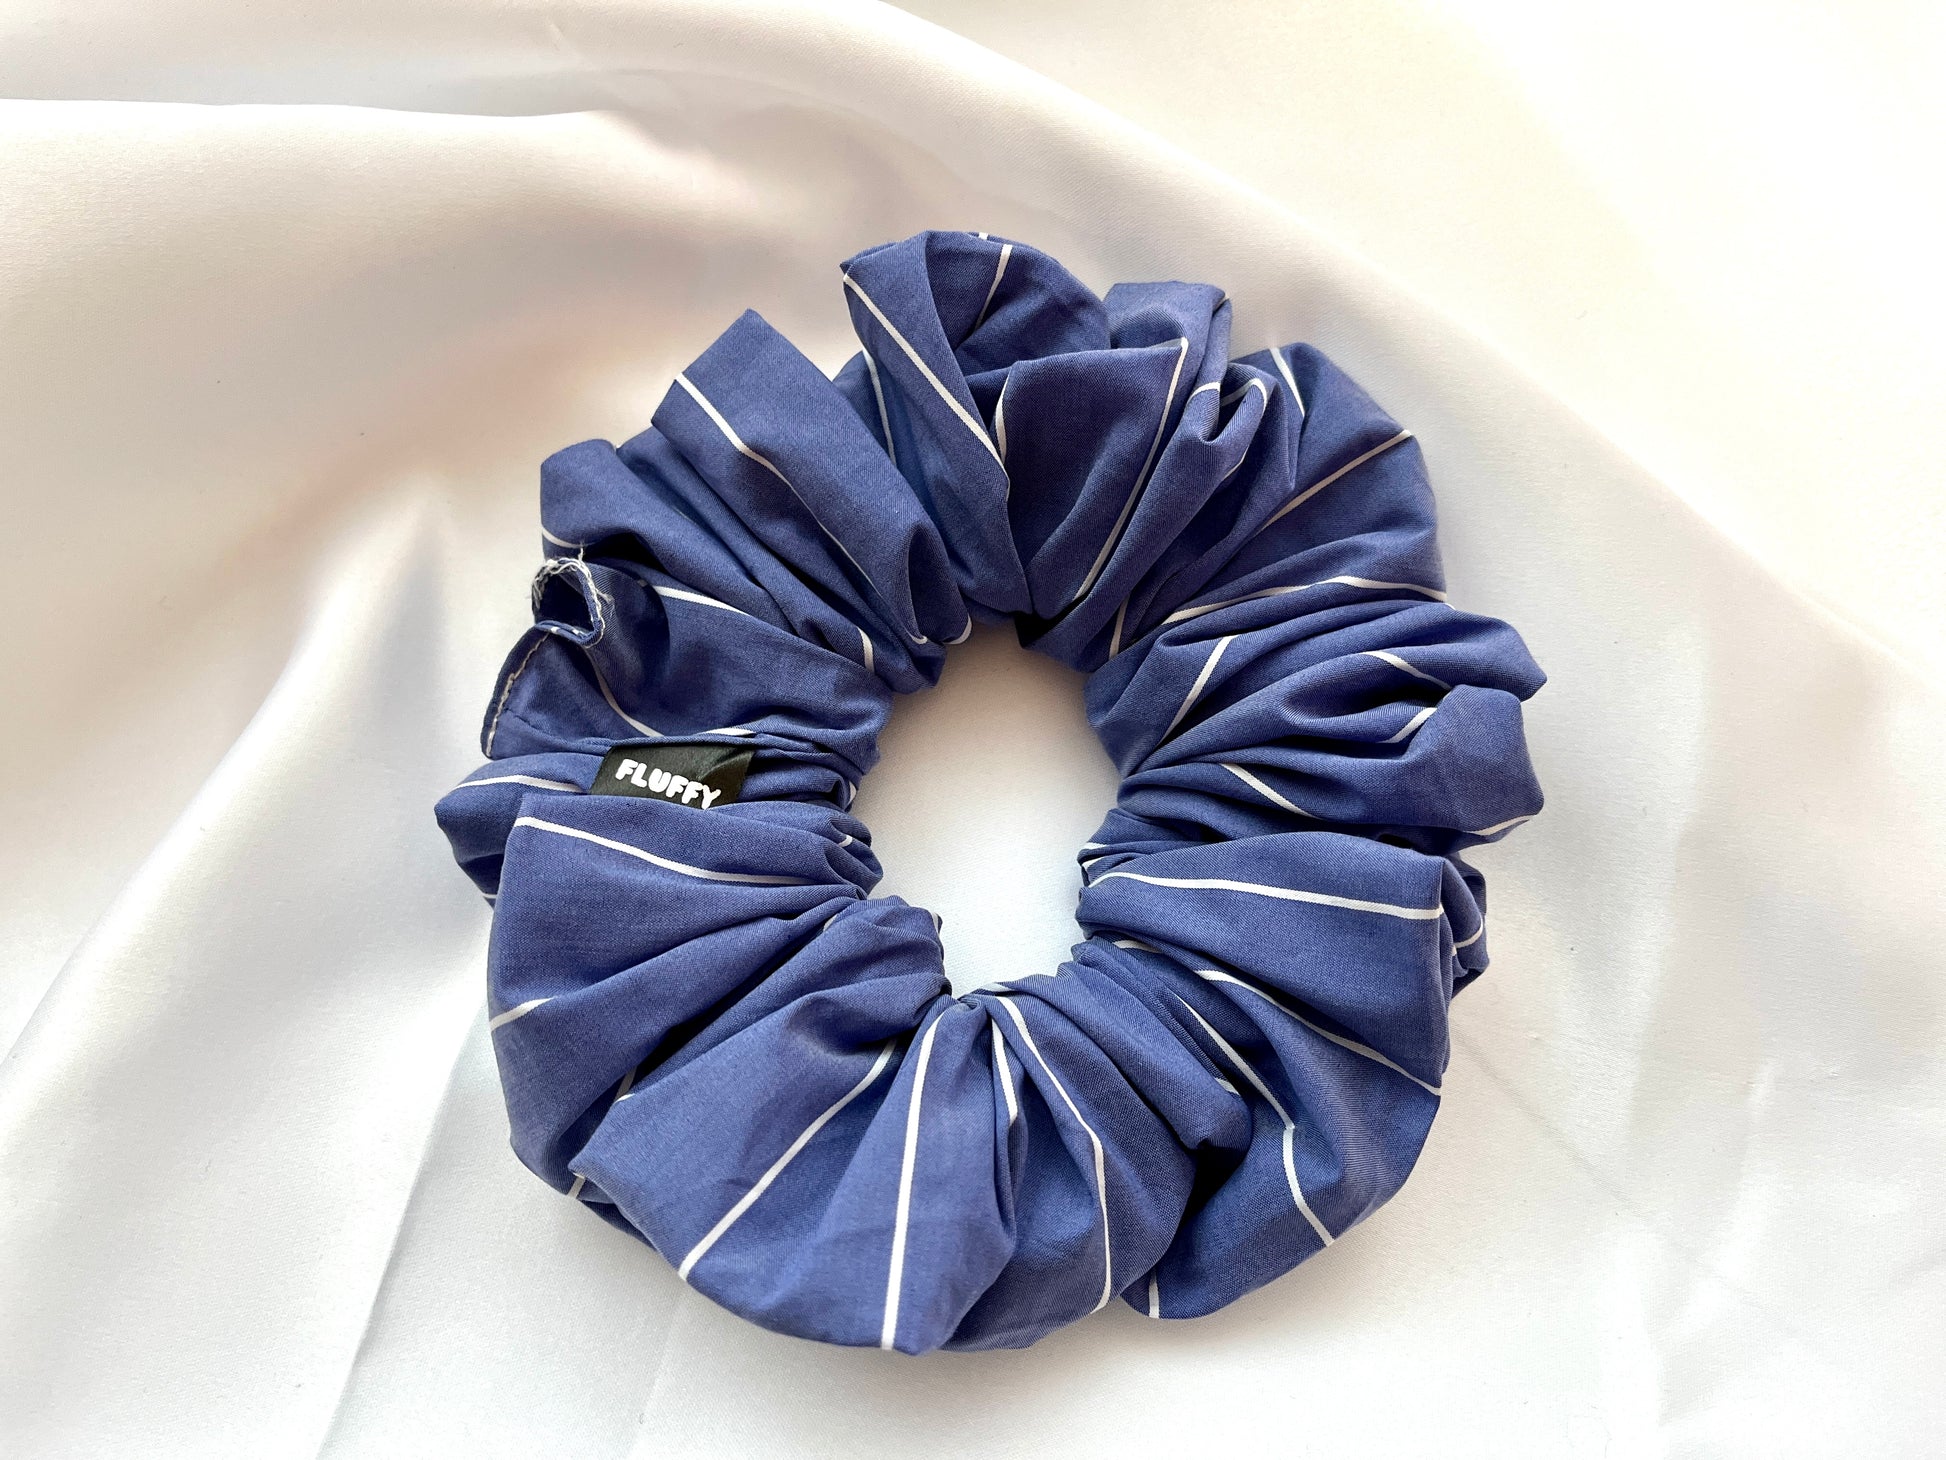 The Ultimate Sleek Pinstripe Fluffy Scrunchie .  The sizes of our cotton scrunchies  are Large, Medium and Mini.  Simply select the size you want in the drop down menu and add them to the card.   Our cotton scrunchies are perfect for all hair types and every person. We have multiple colors and sizes available